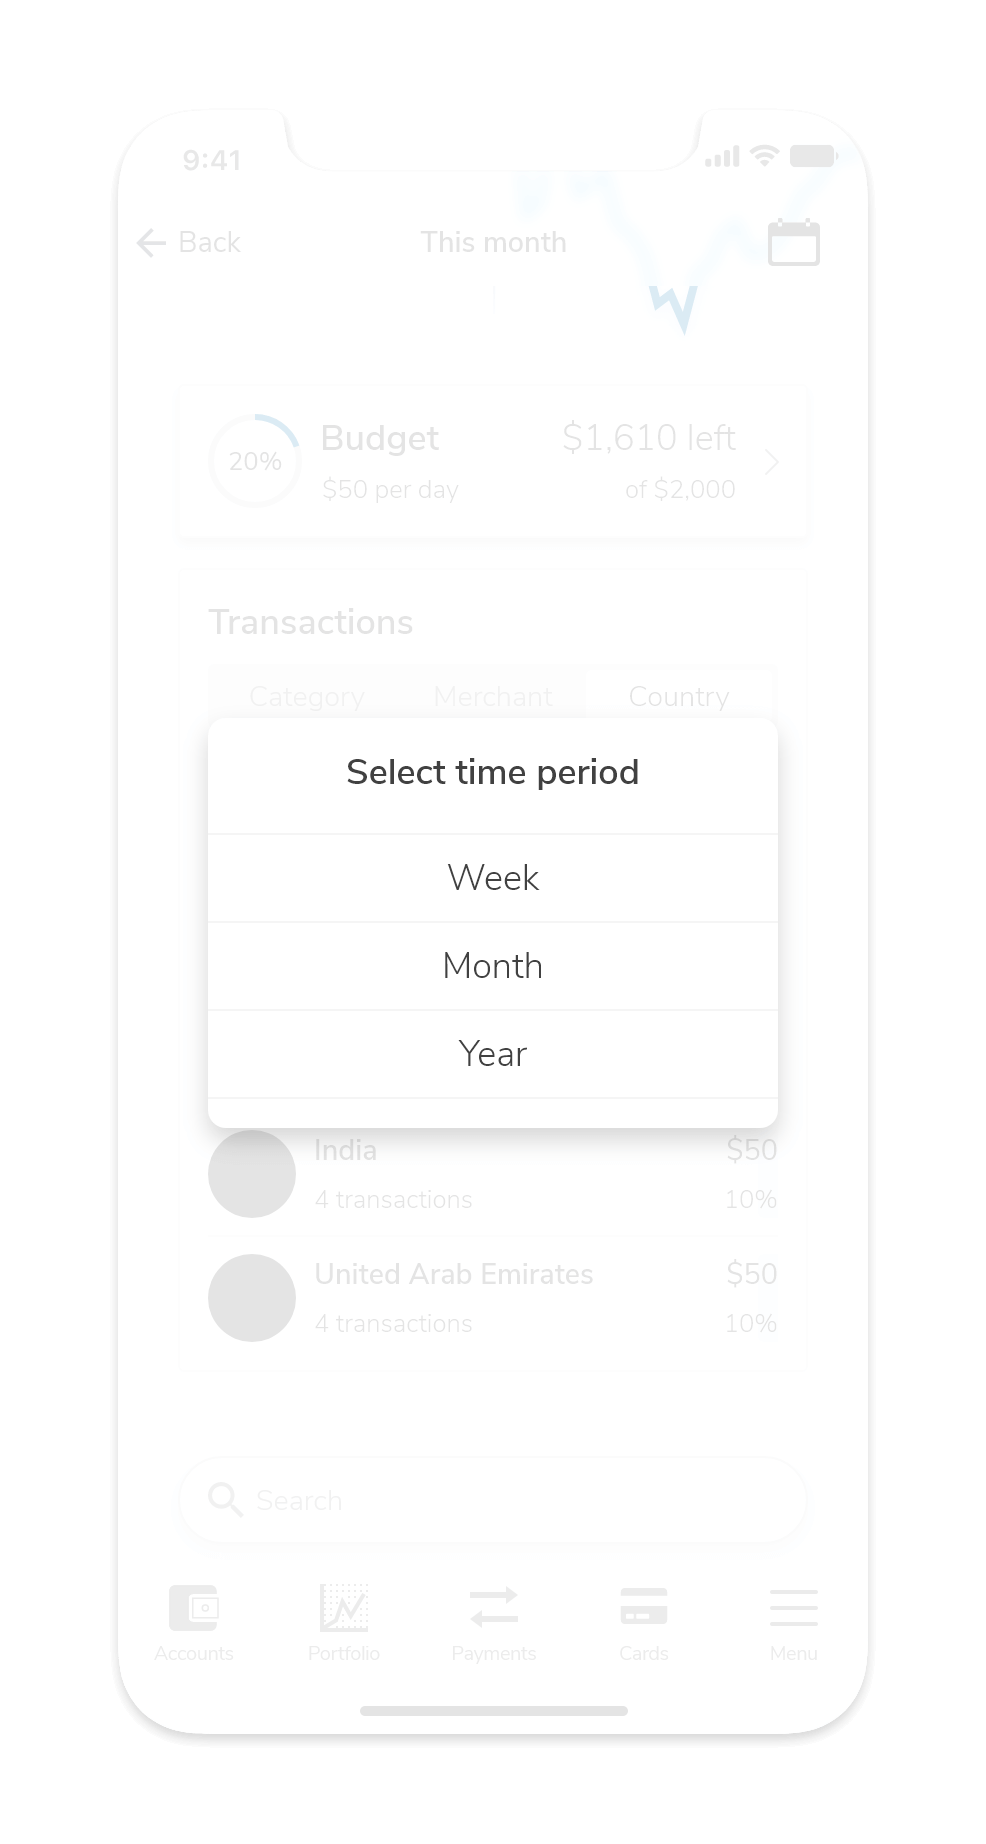 Users can change the period they want to track their transaction where they can monitor weekly, monthly, and yearly habits.